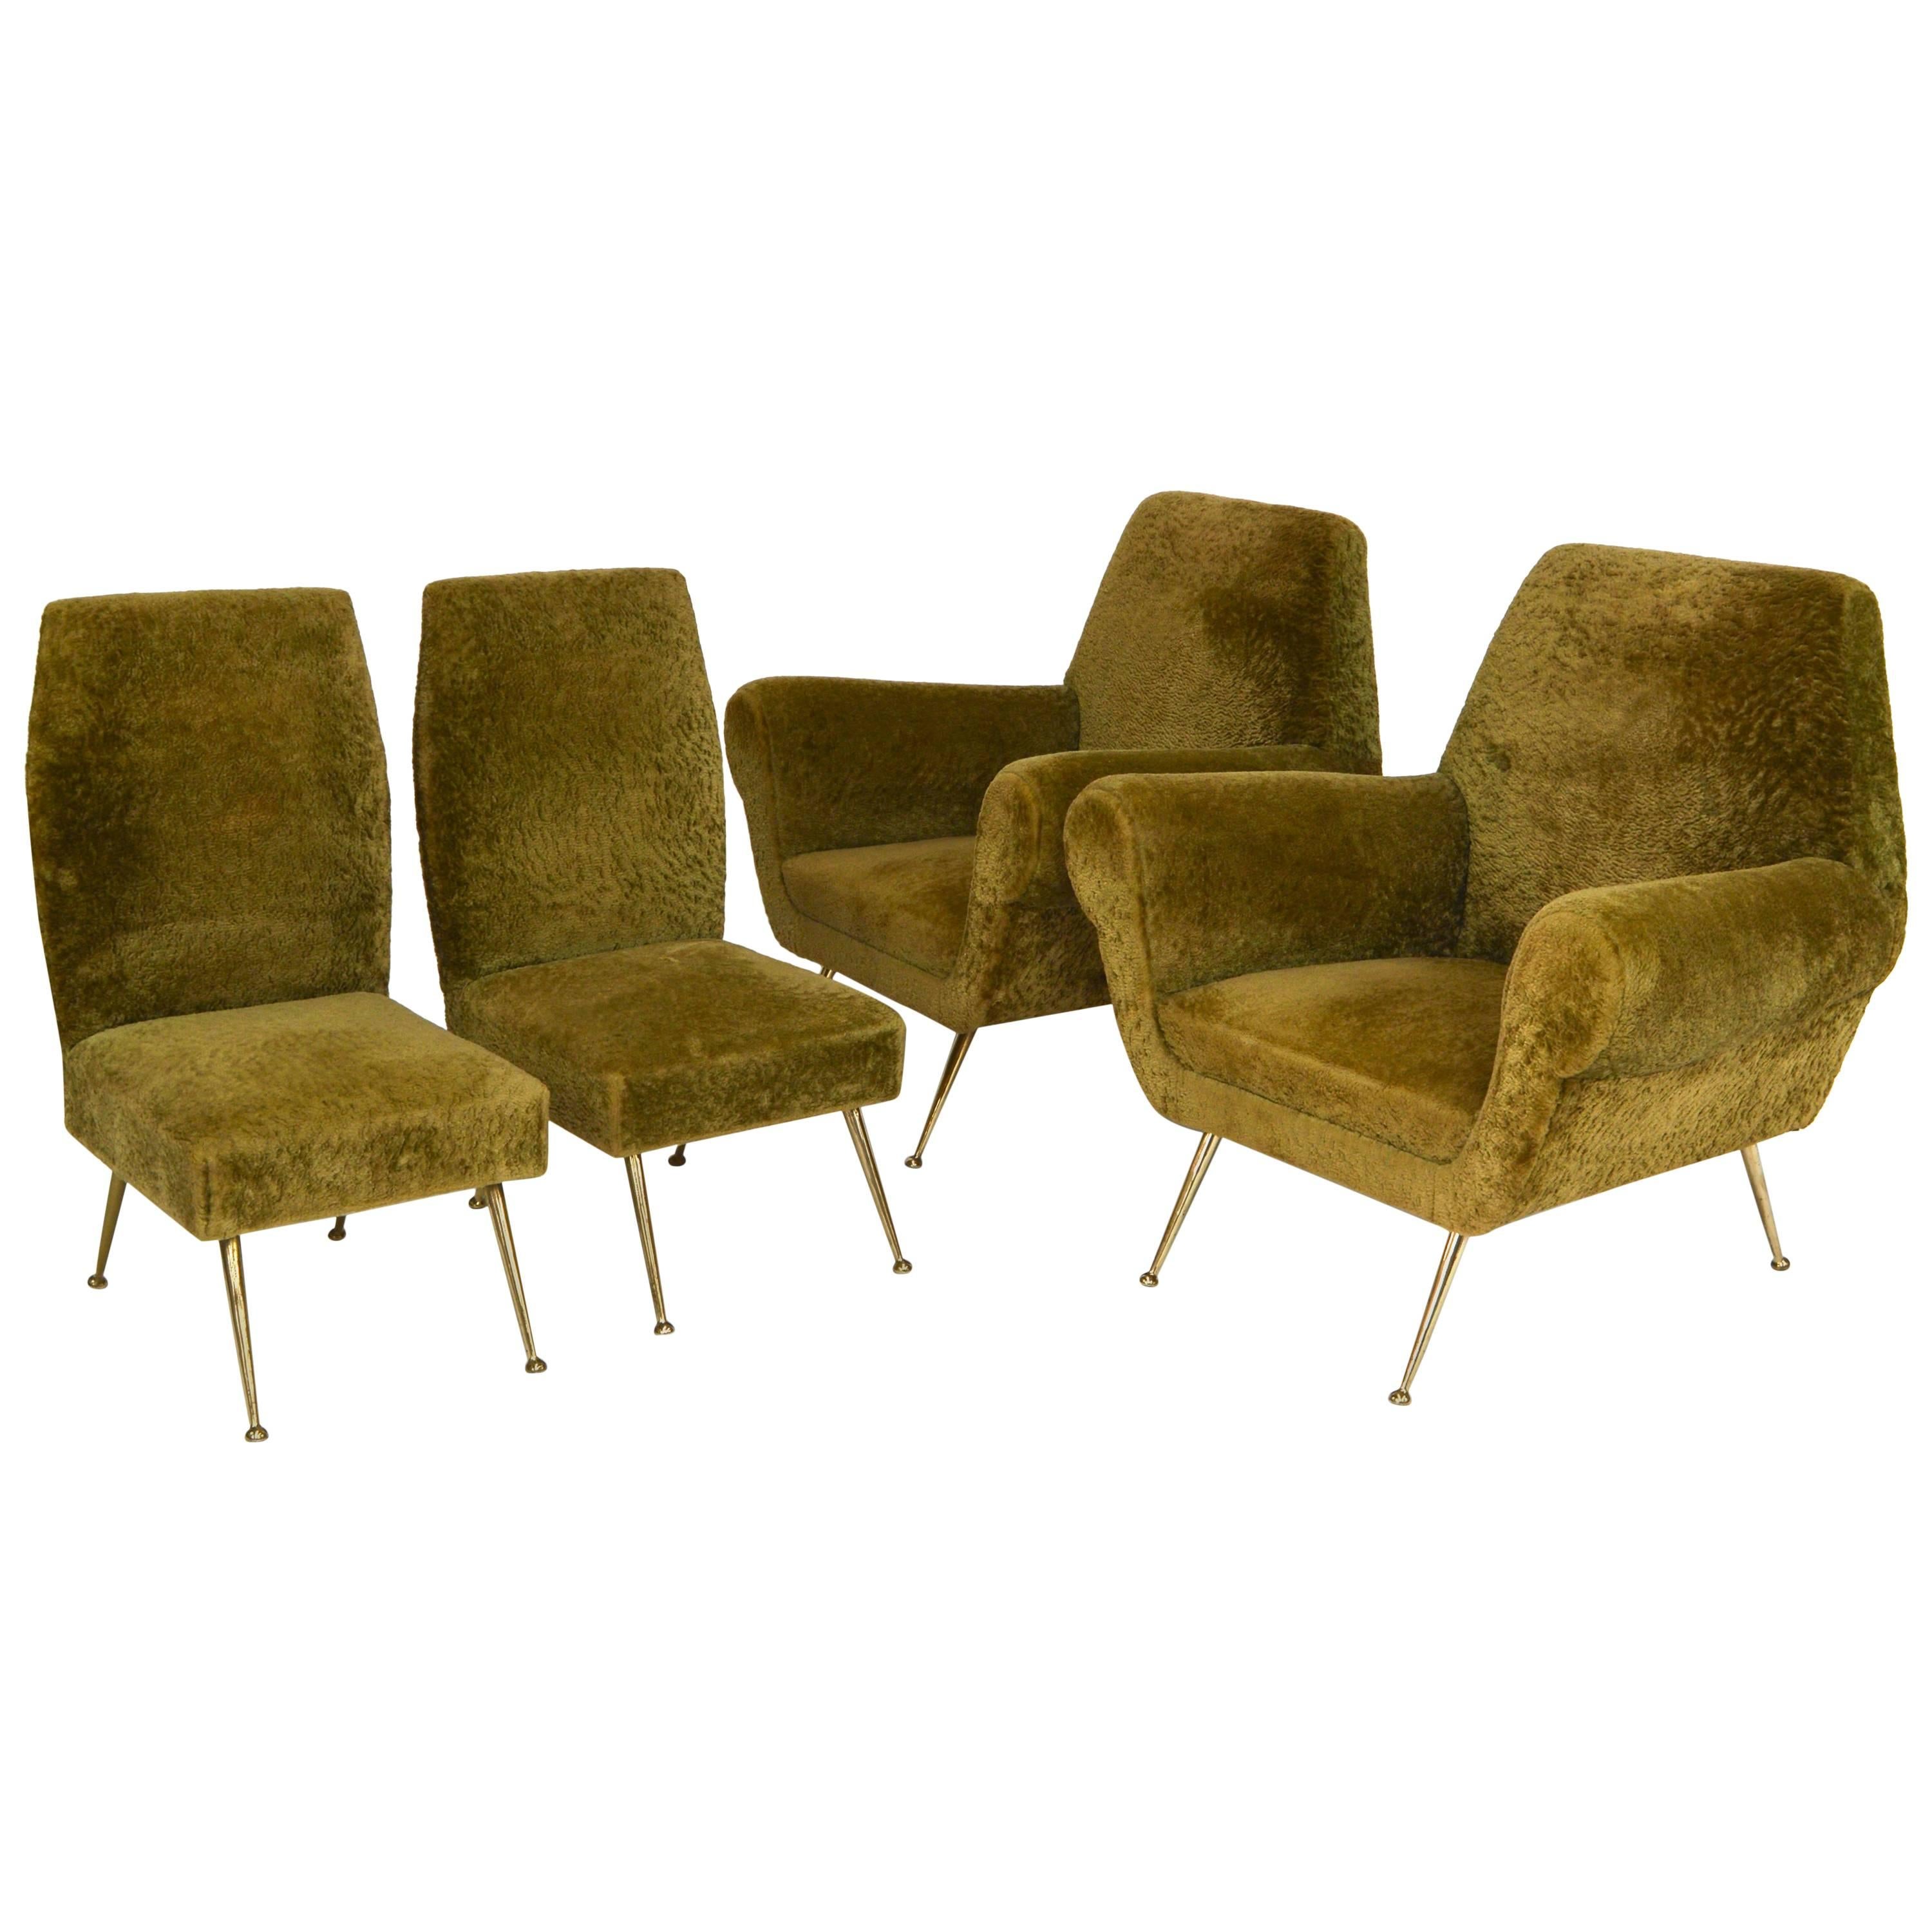 Rare Set of Gigi Radice Lounge Chairs and Side Chairs, Italy, 1950s